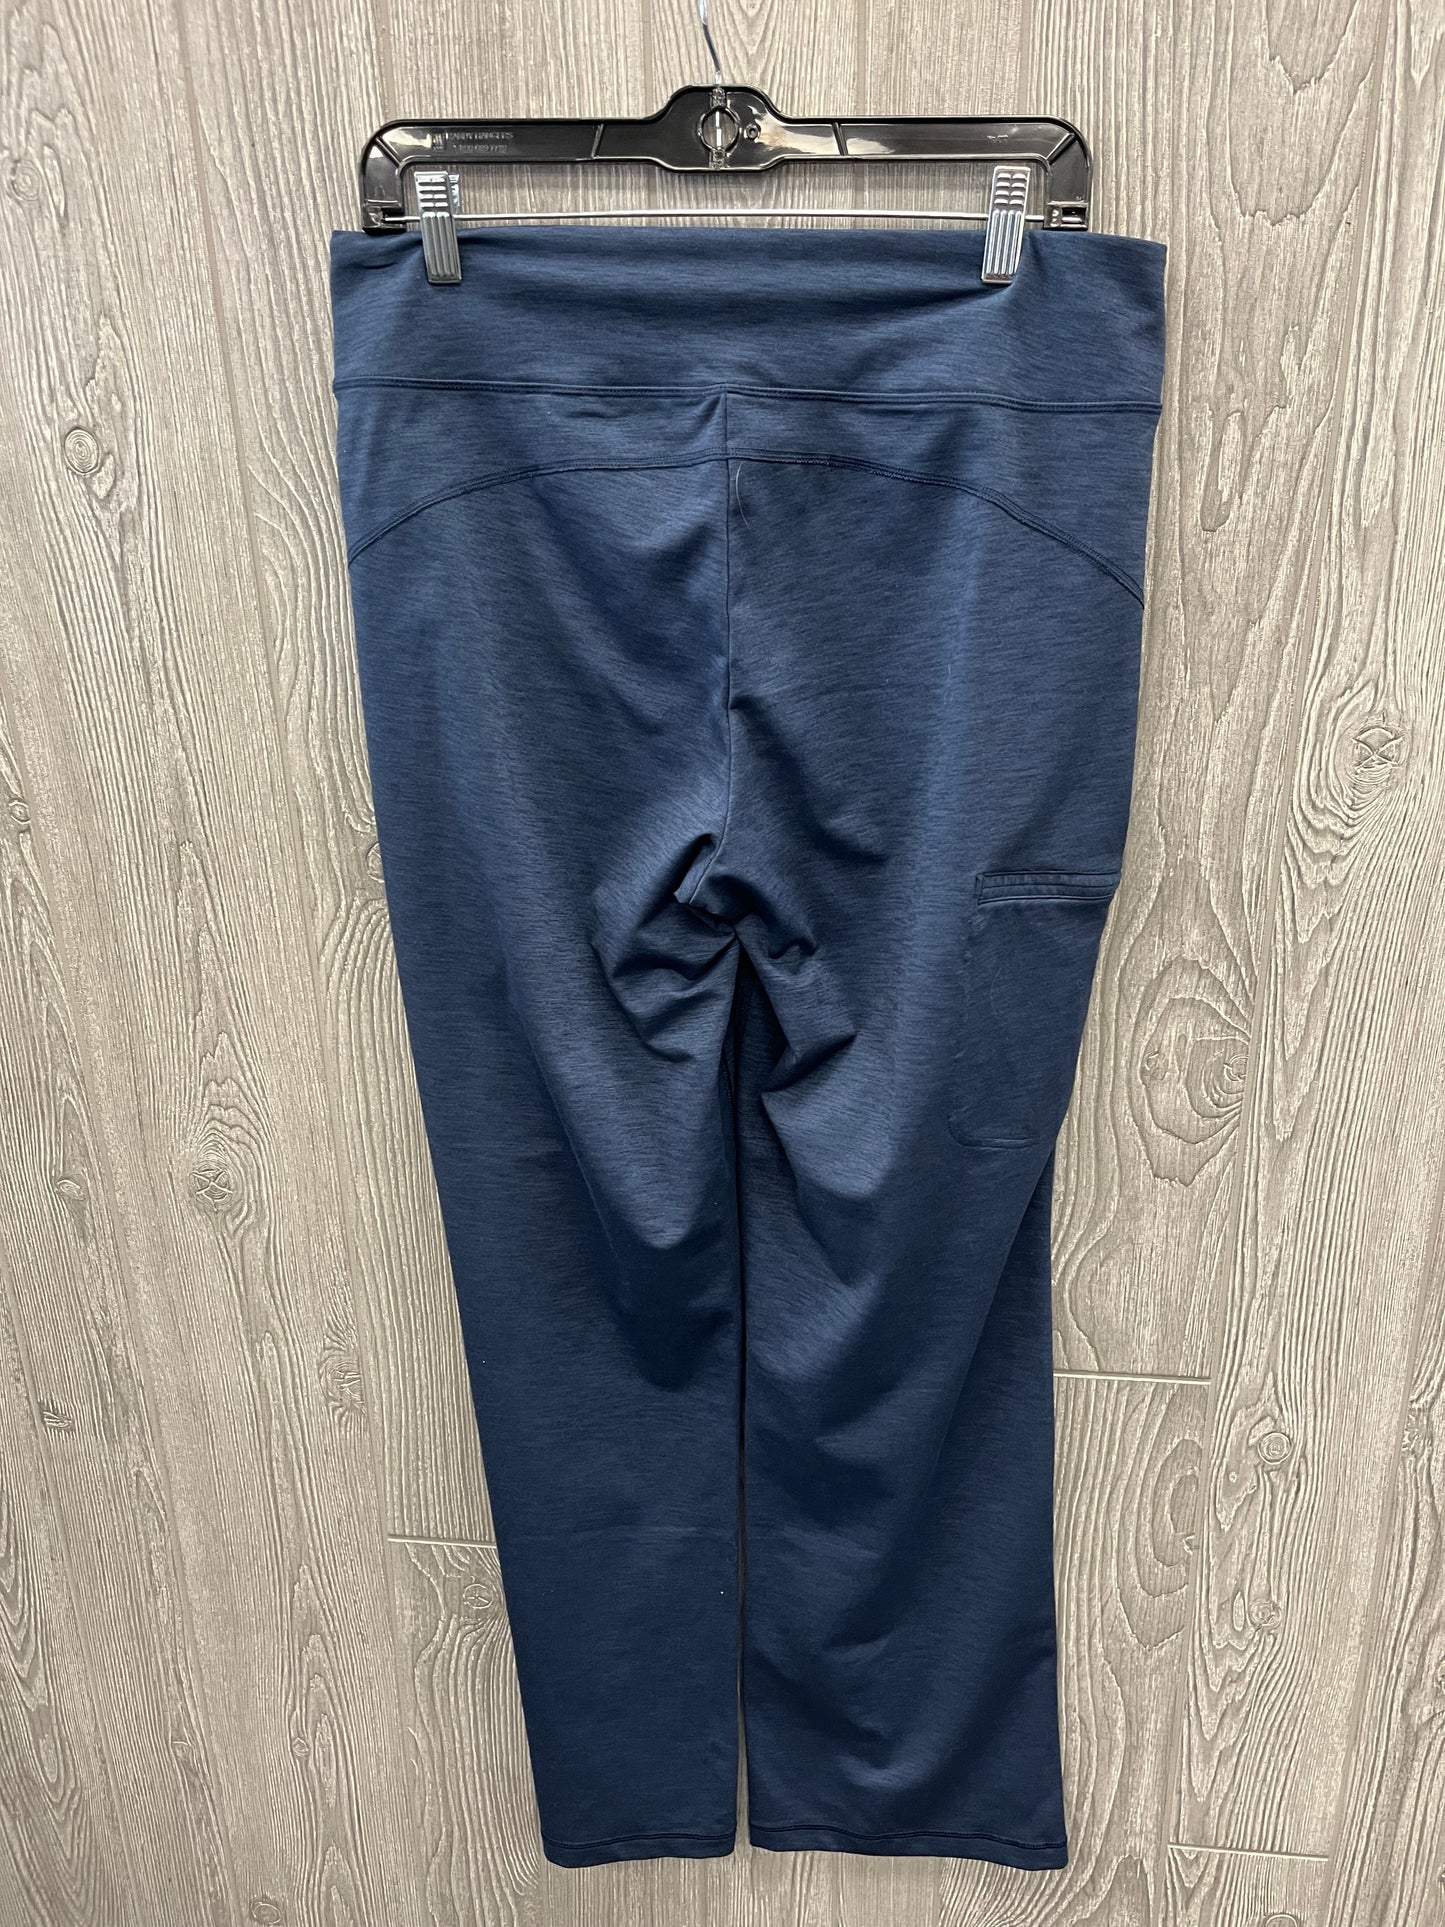 Athletic Pants By Duluth Trading  Size: M